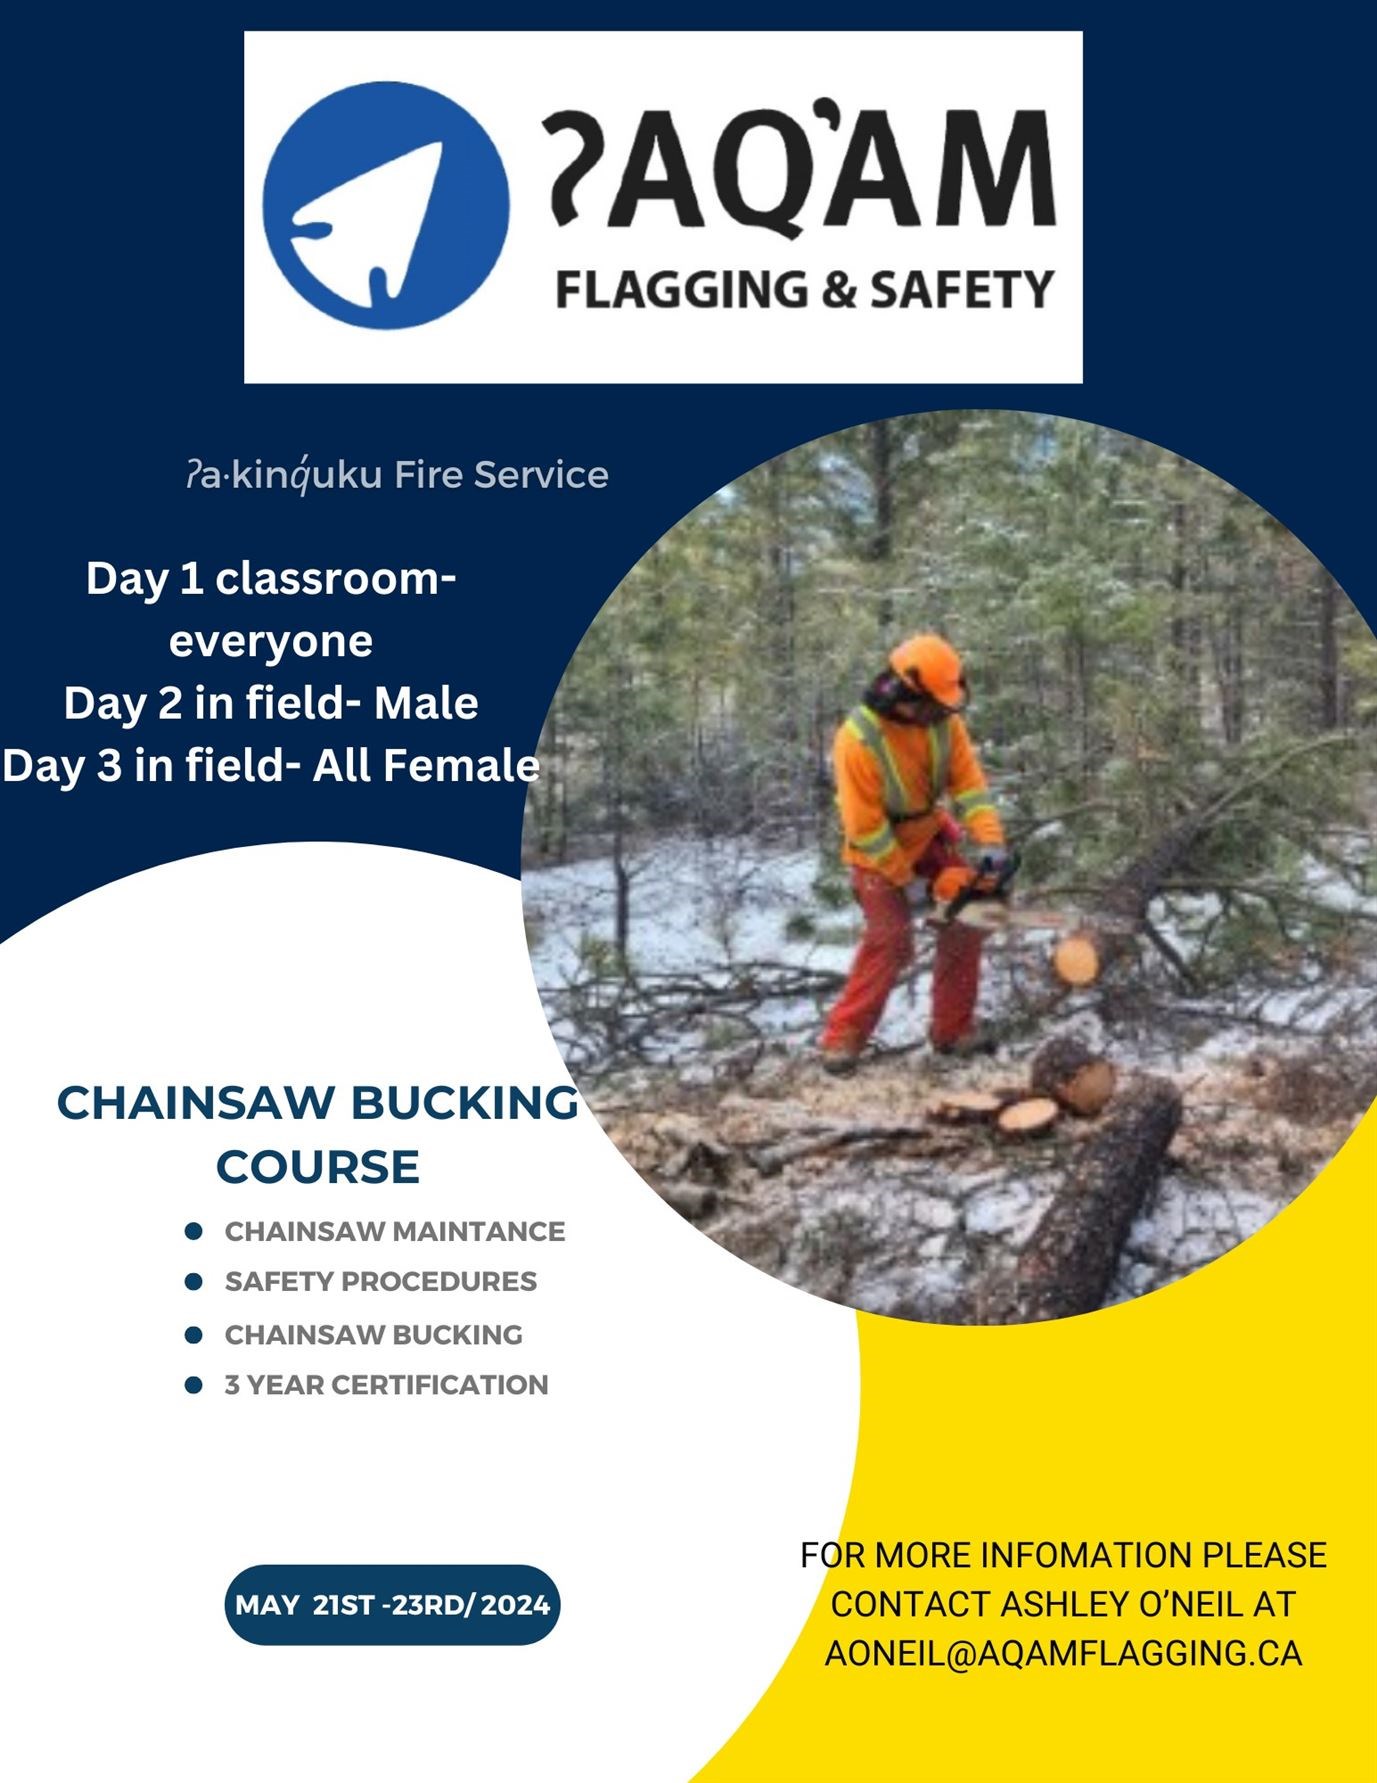 Chainsaw Bucking Course